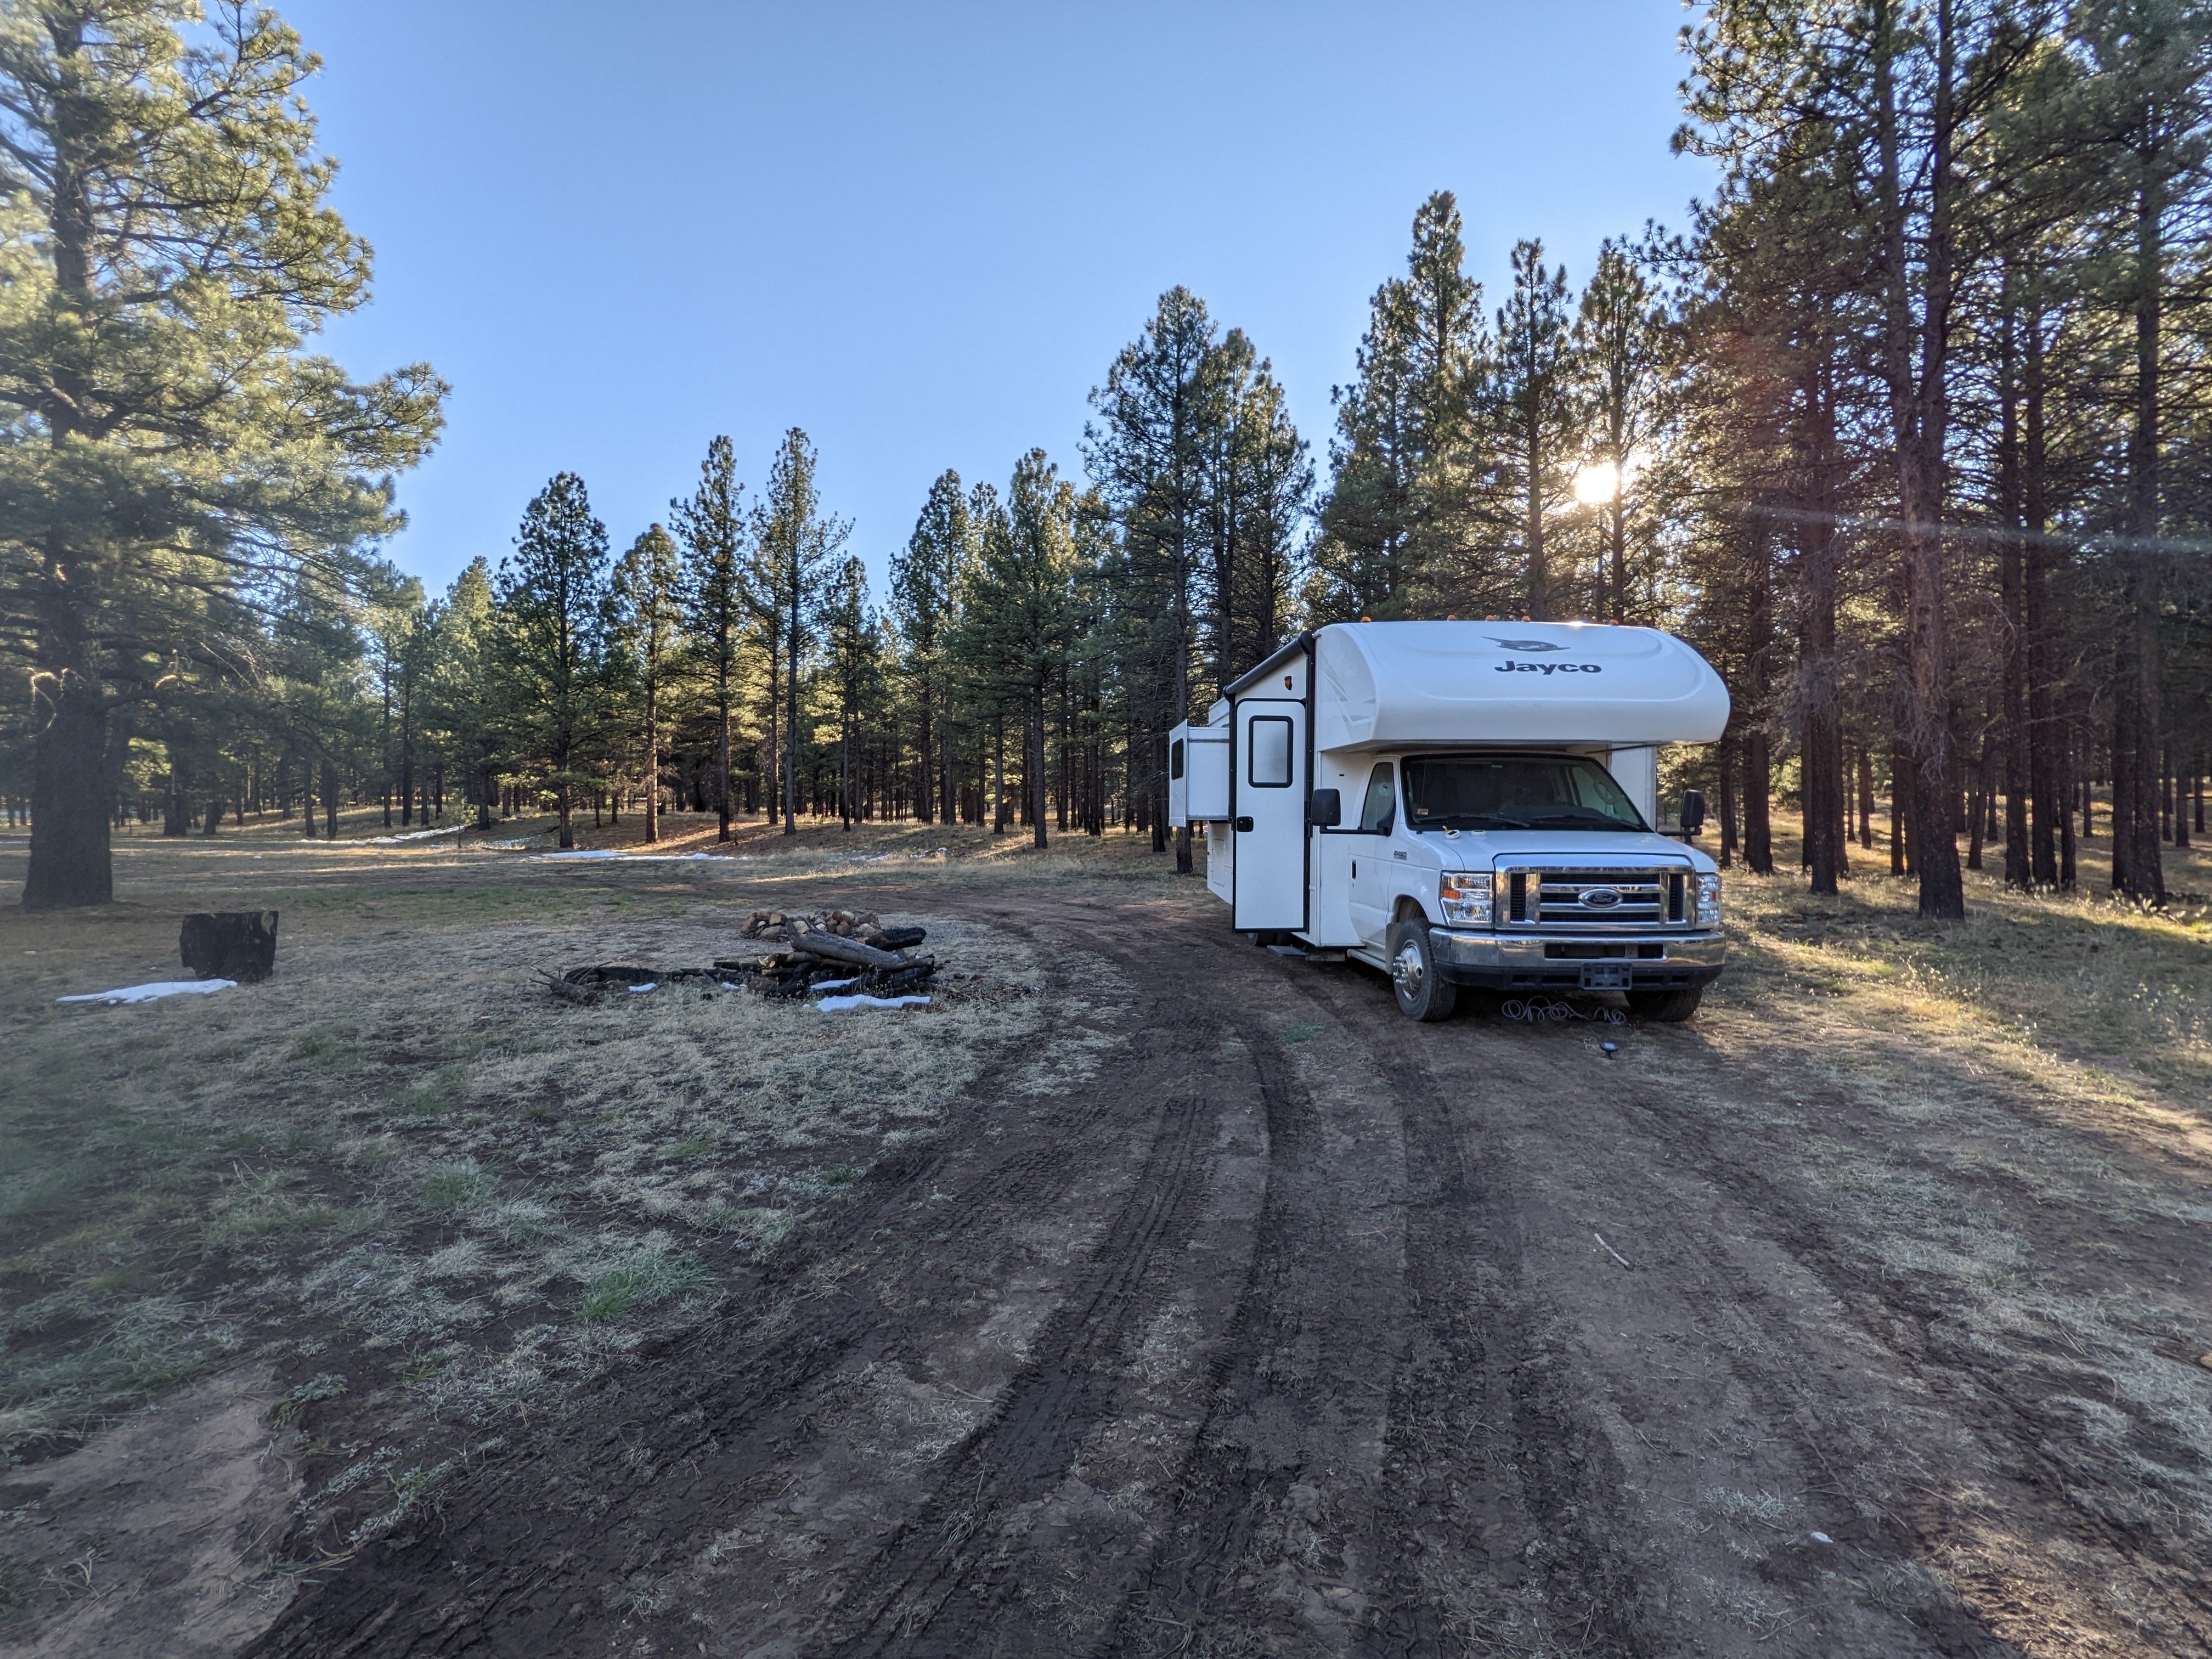 Camper submitted image from Forest Service #247 Road Dispersed Camping - 1